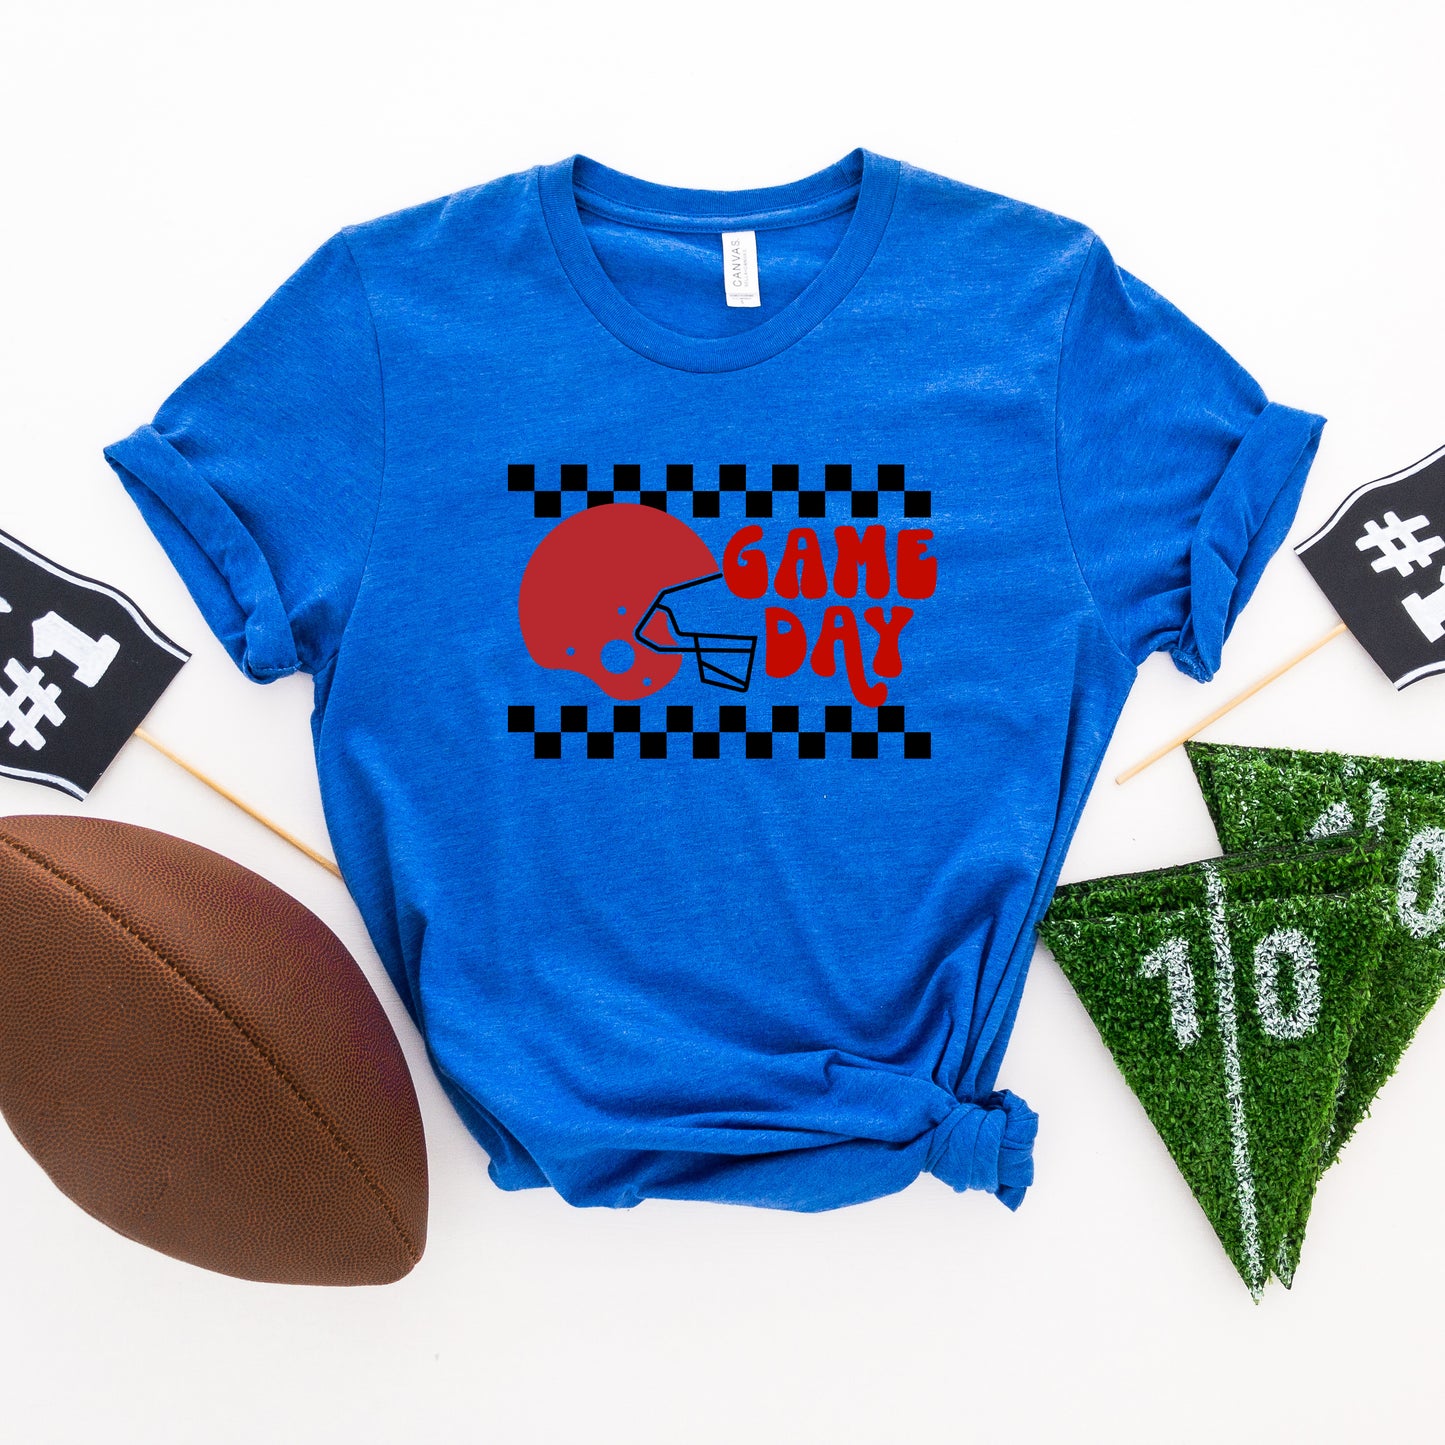 Checkered Game Day | Short Sleeve Graphic Tee